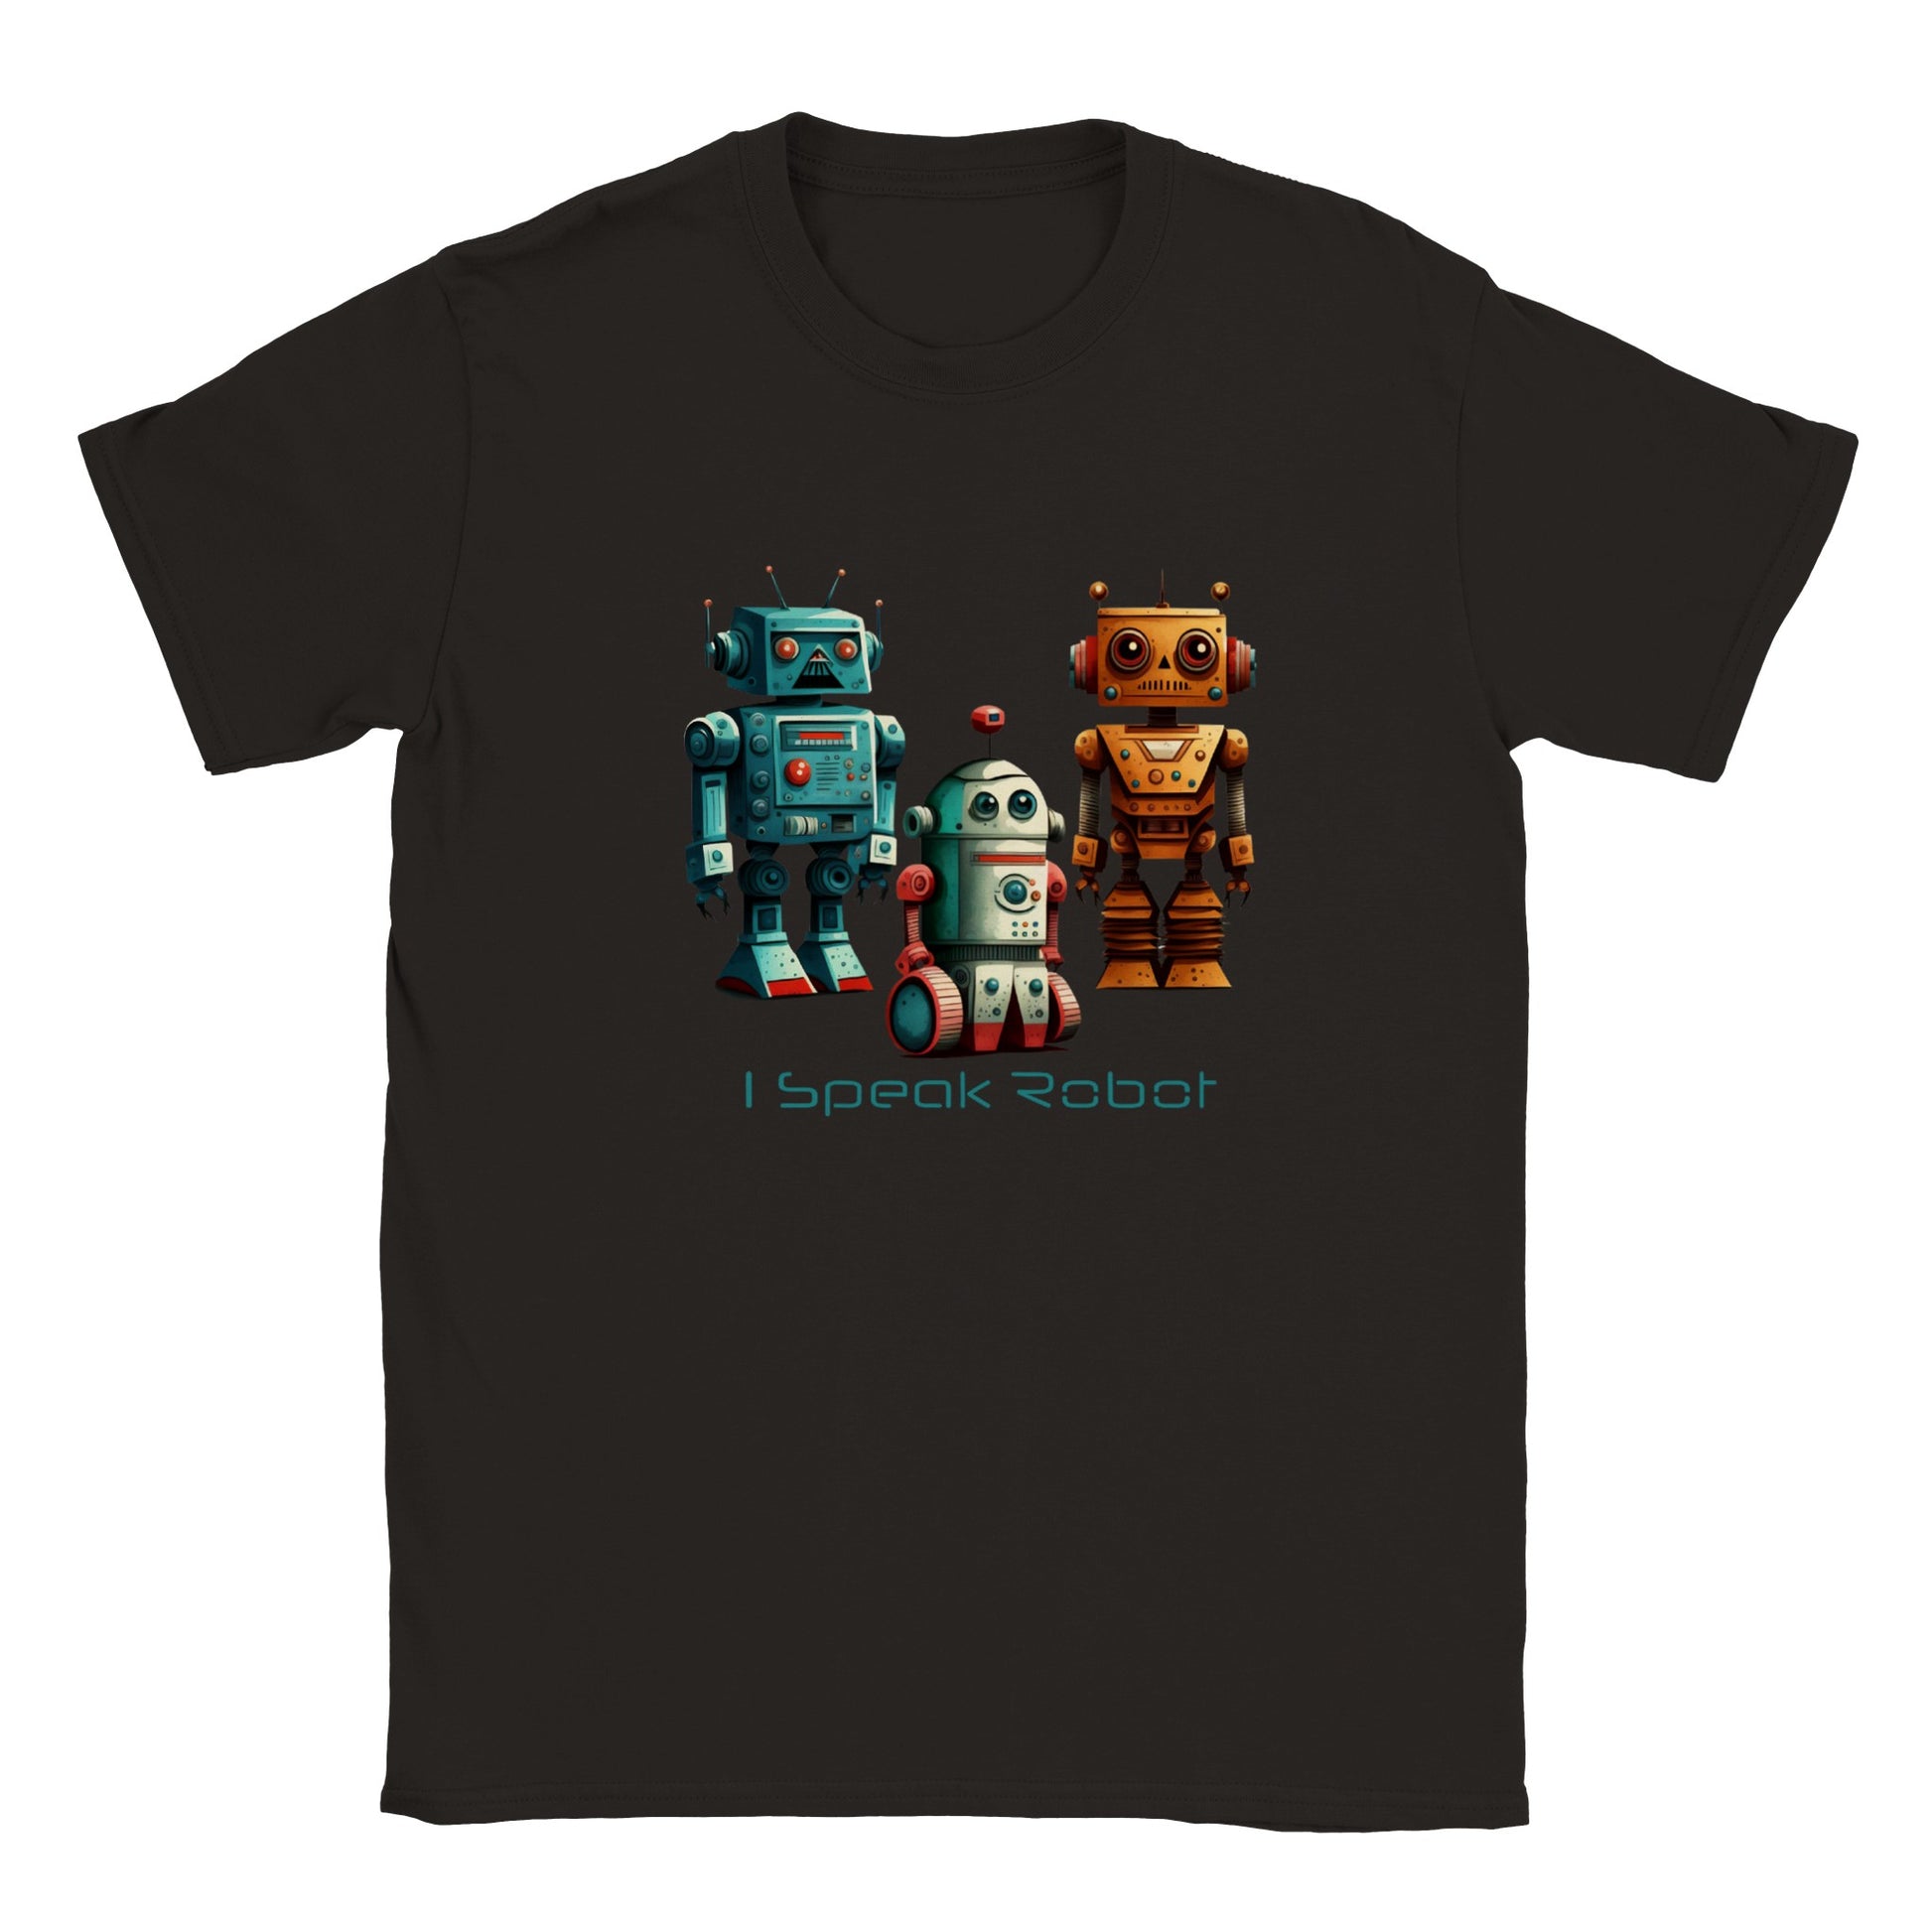 Black t-shirt with 3 robots and the caption I speak robot